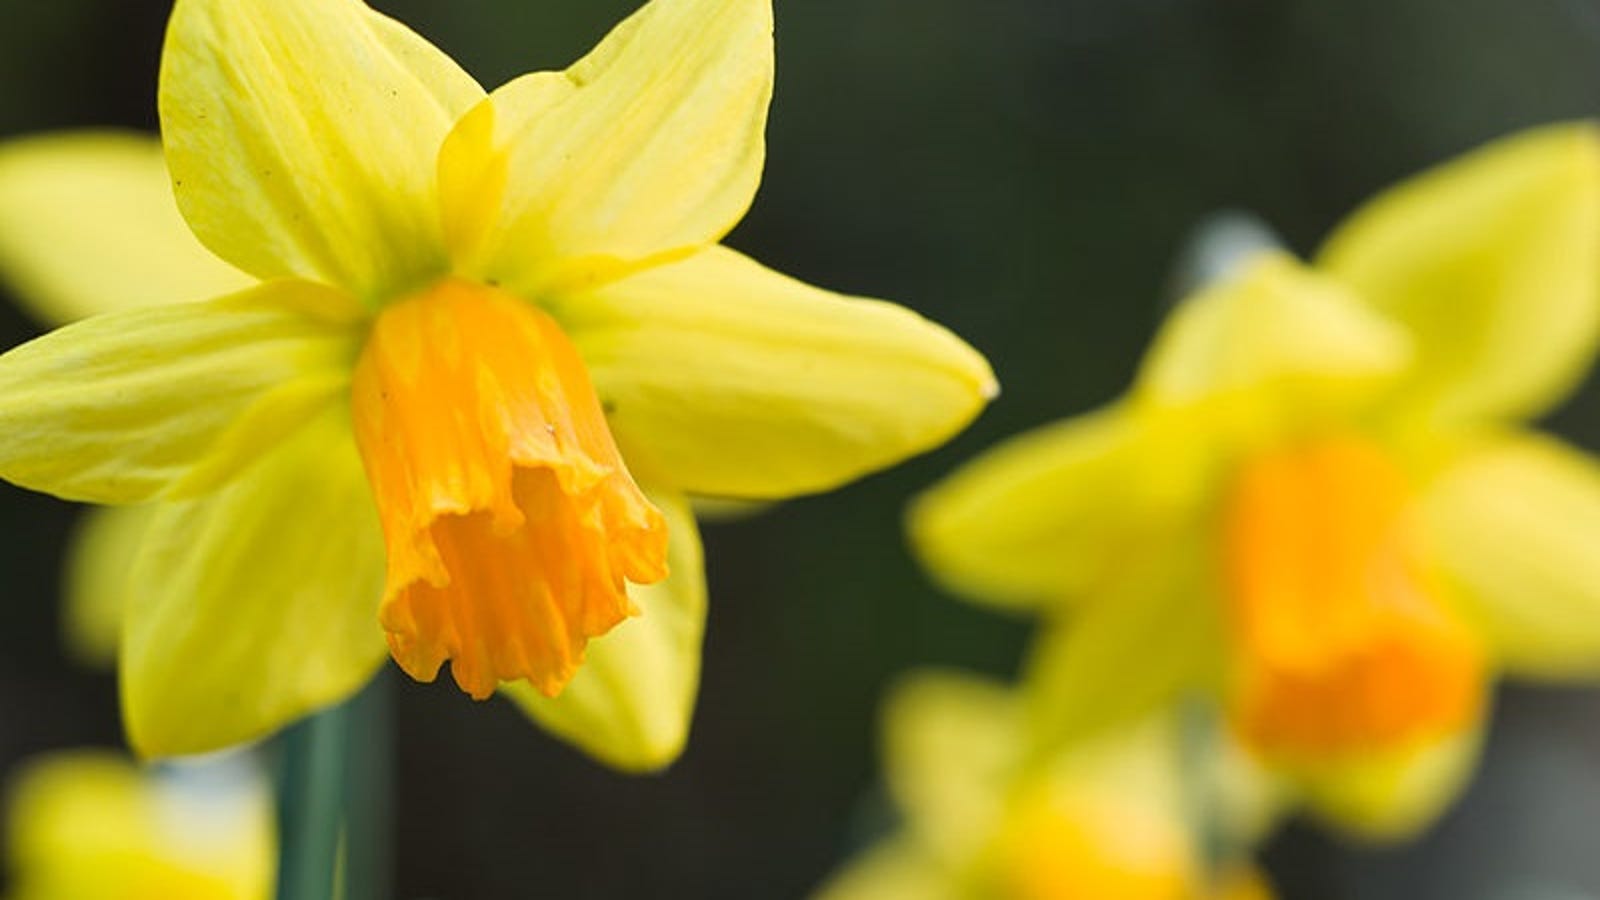 Daffodils Are Getting Revenge on Florists With Ground-Up Kidney Stones